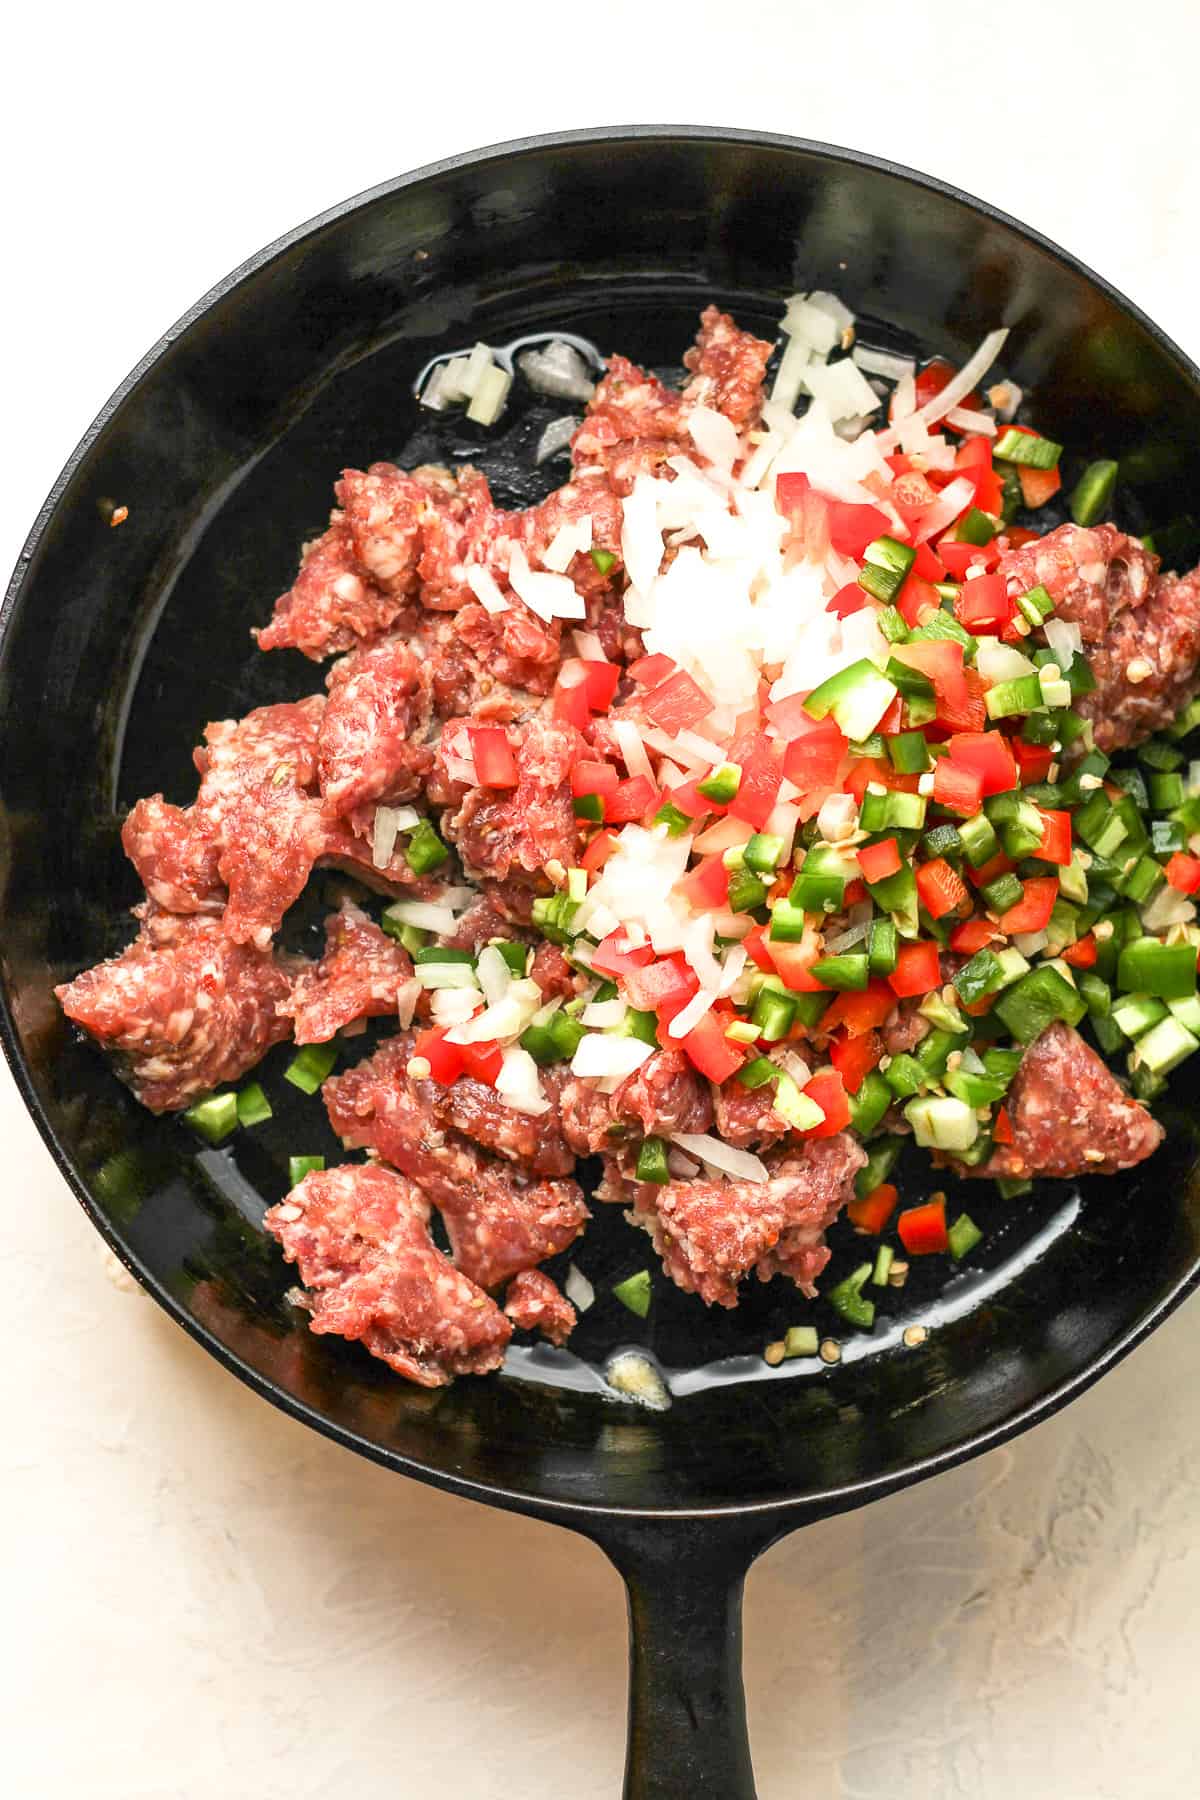 A skillet of the raw sausage, onions, and peppers.